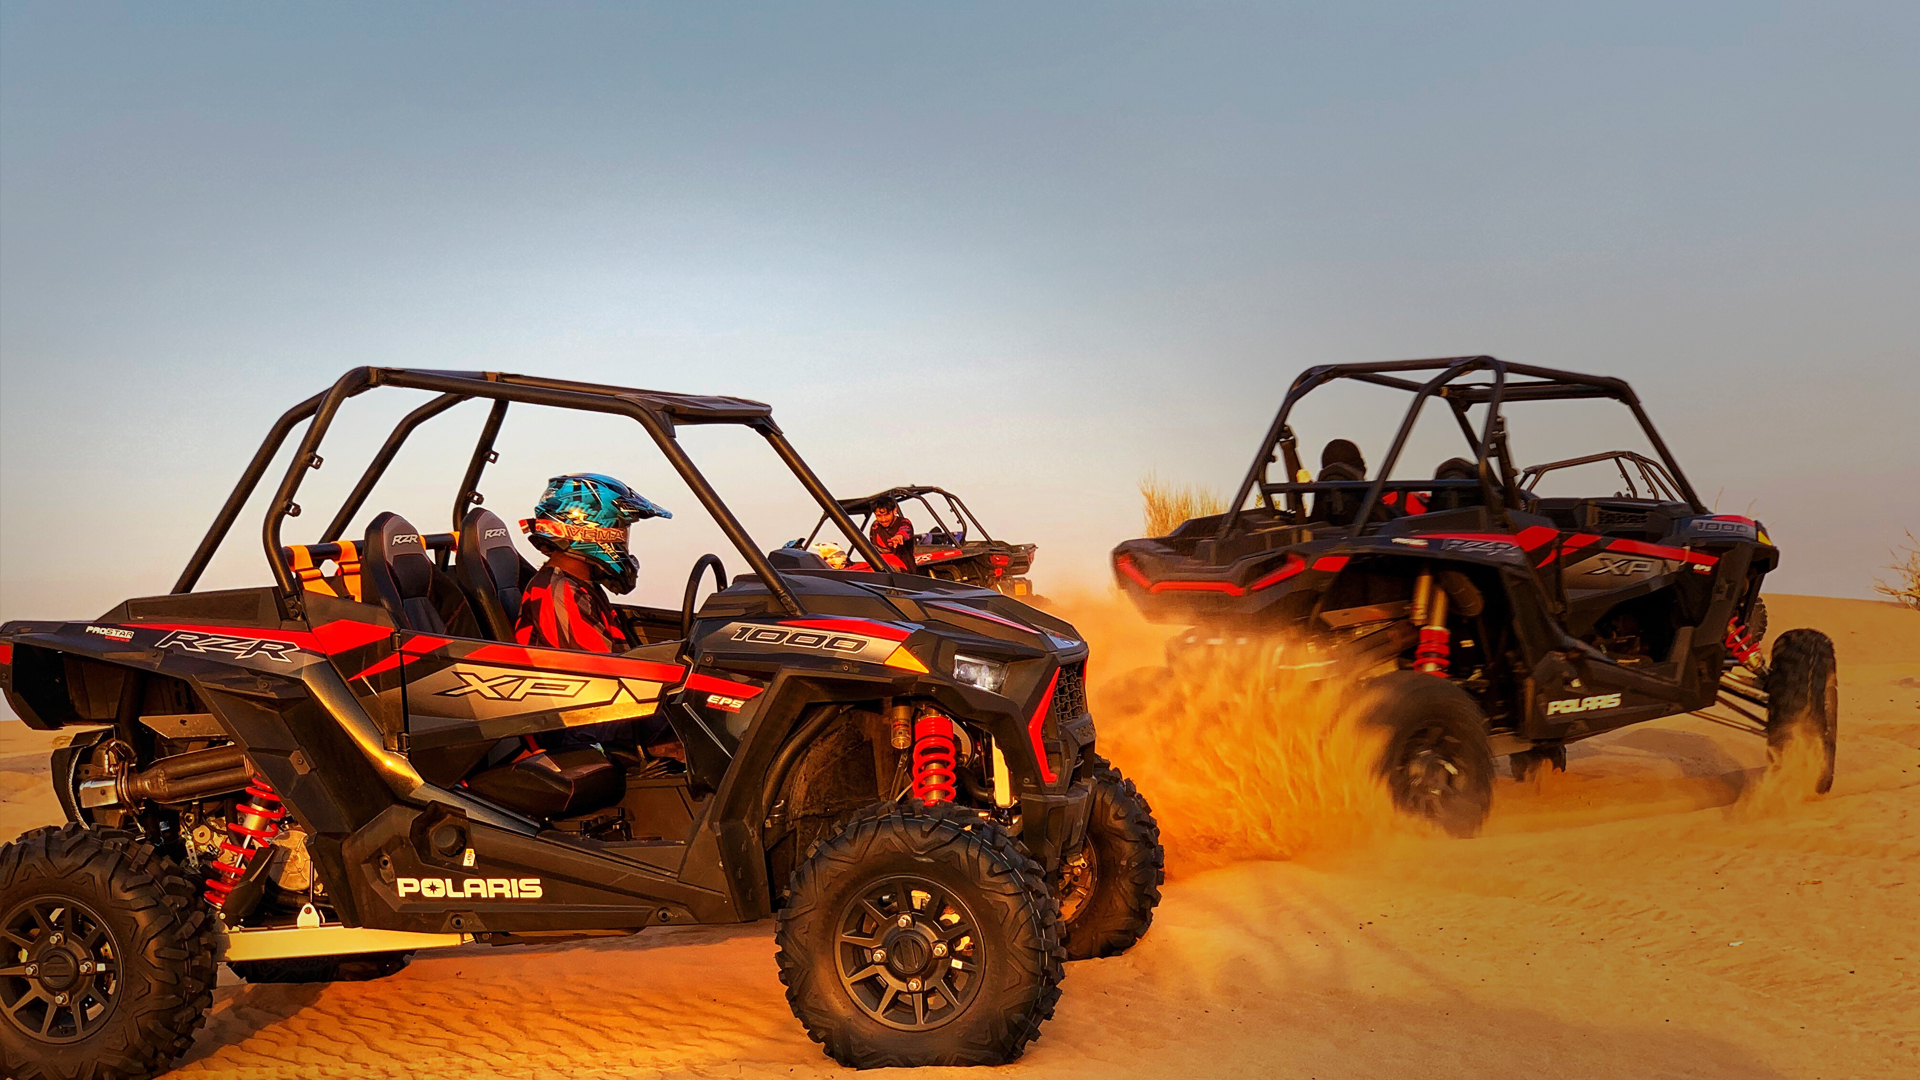 Book A Buggy To Set Yourself Free In Dubai Desert